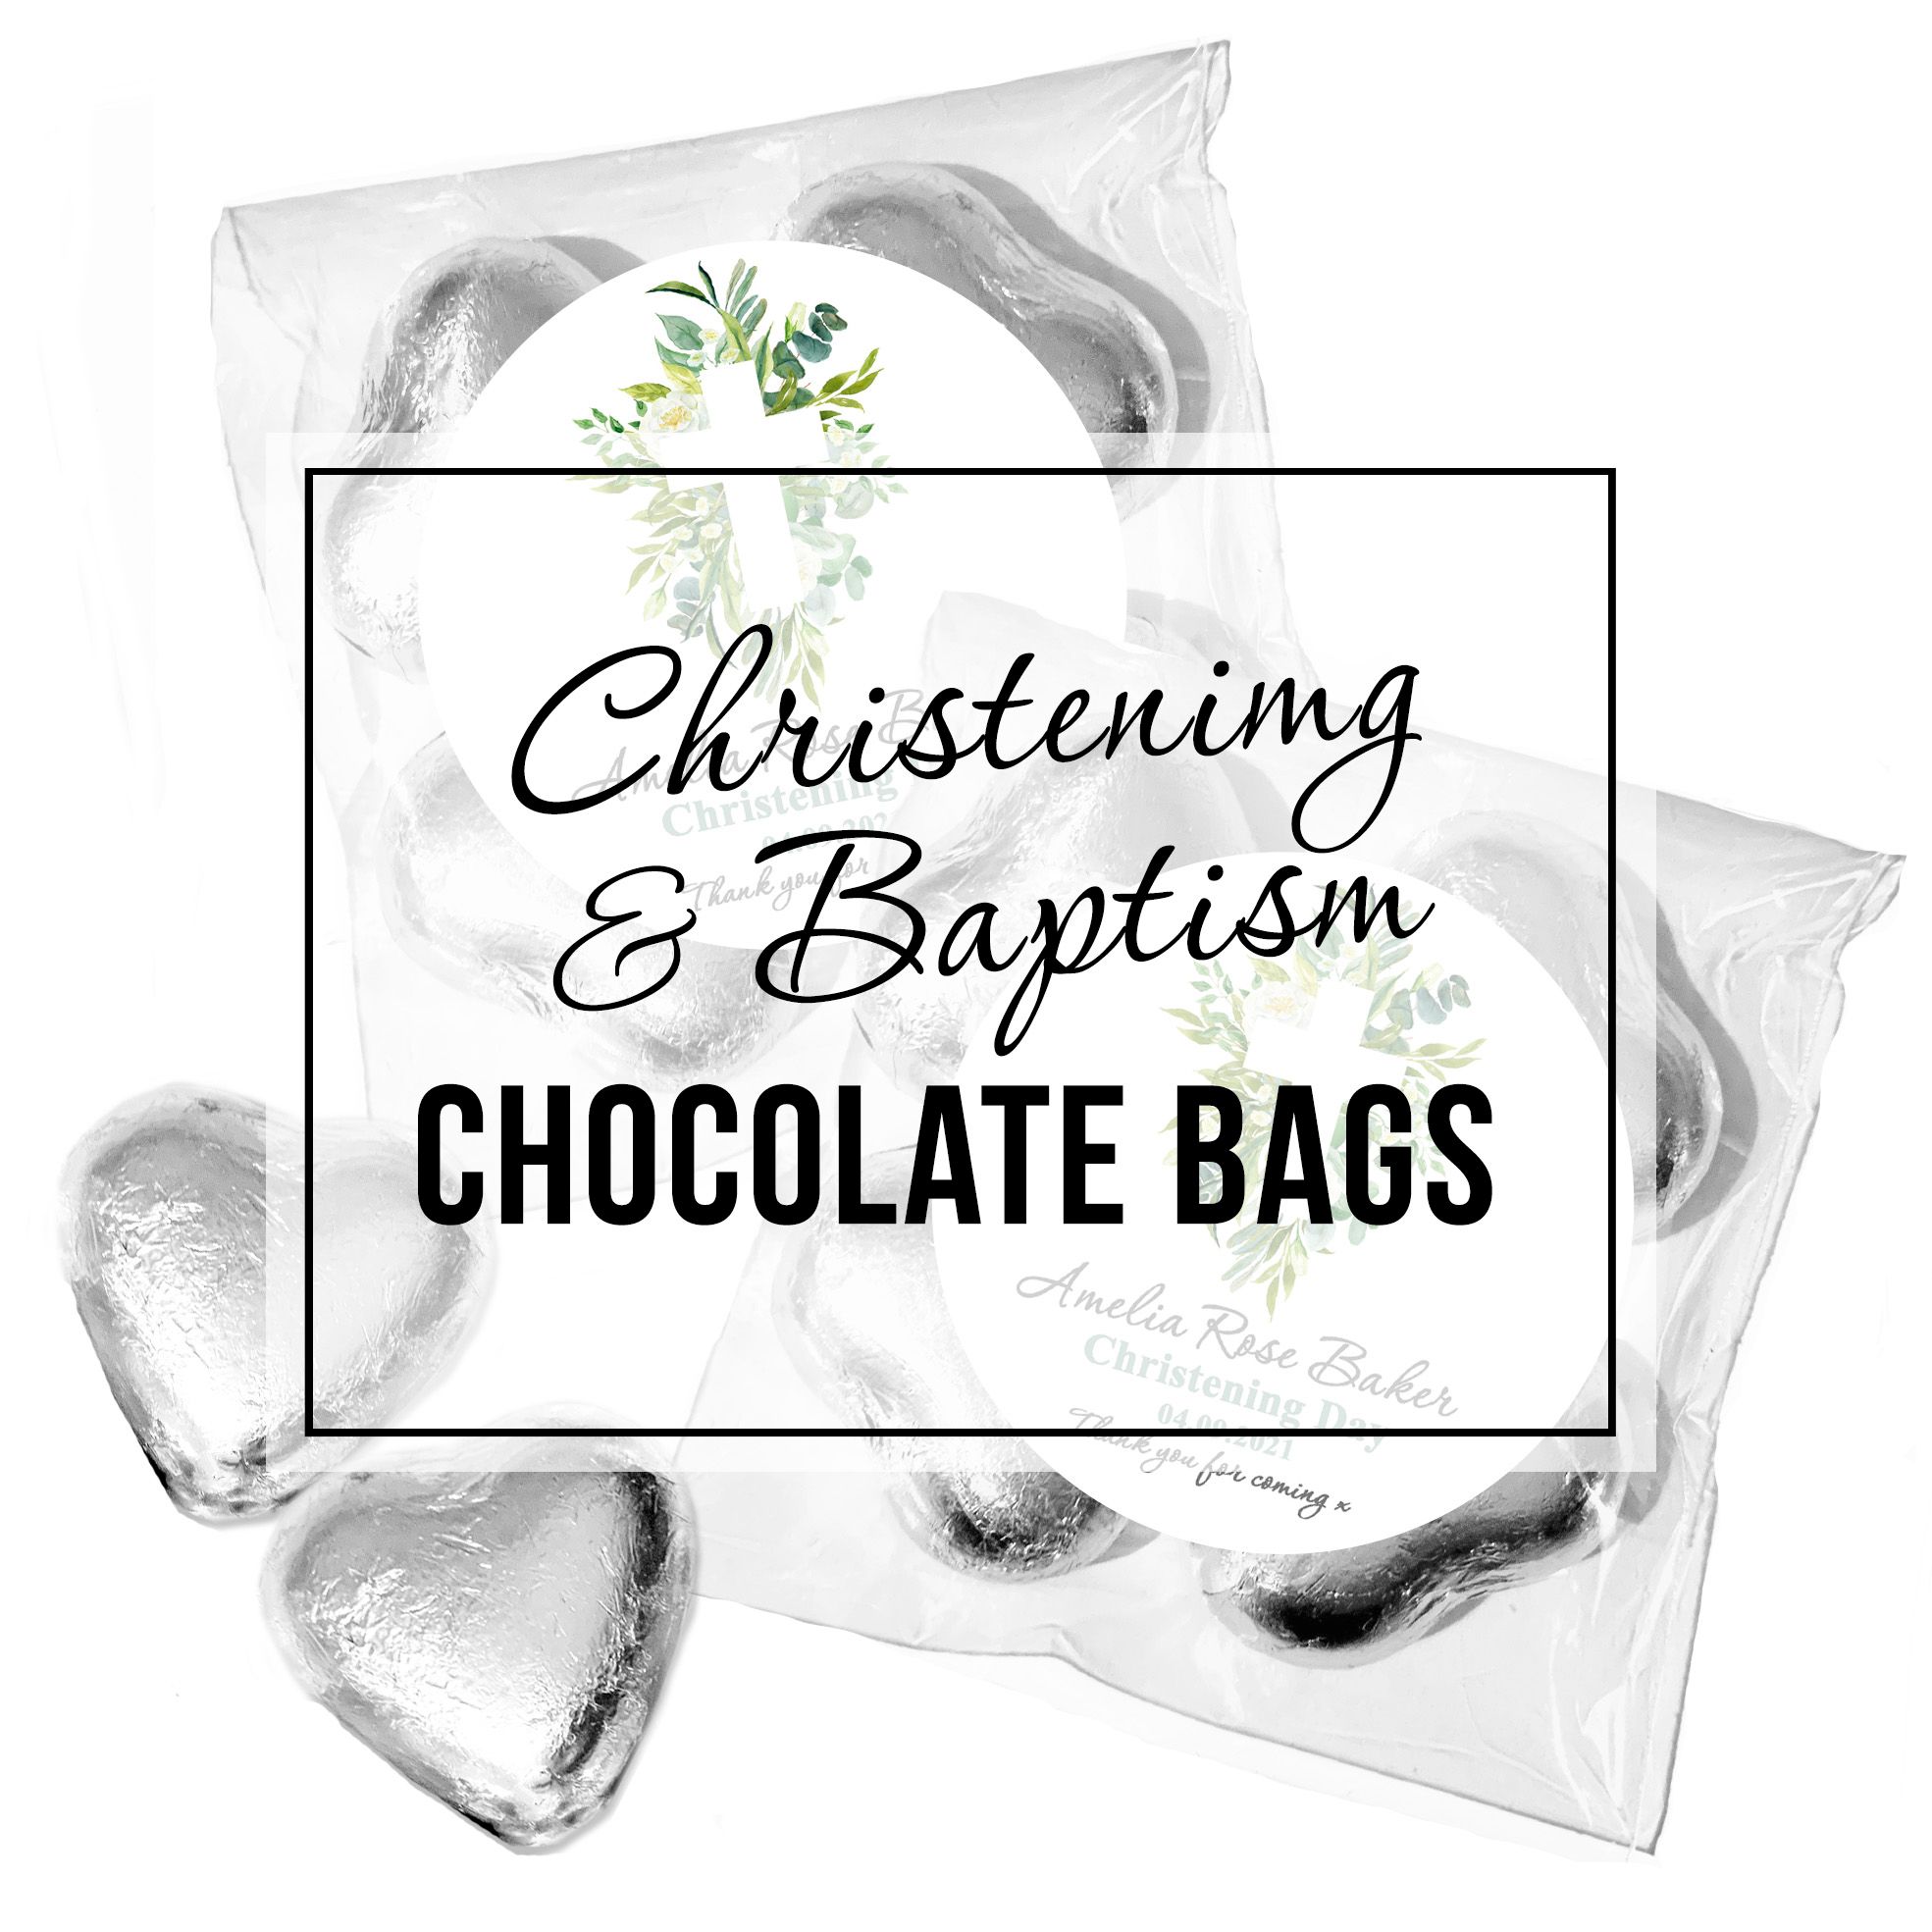 Christening chocolate favours